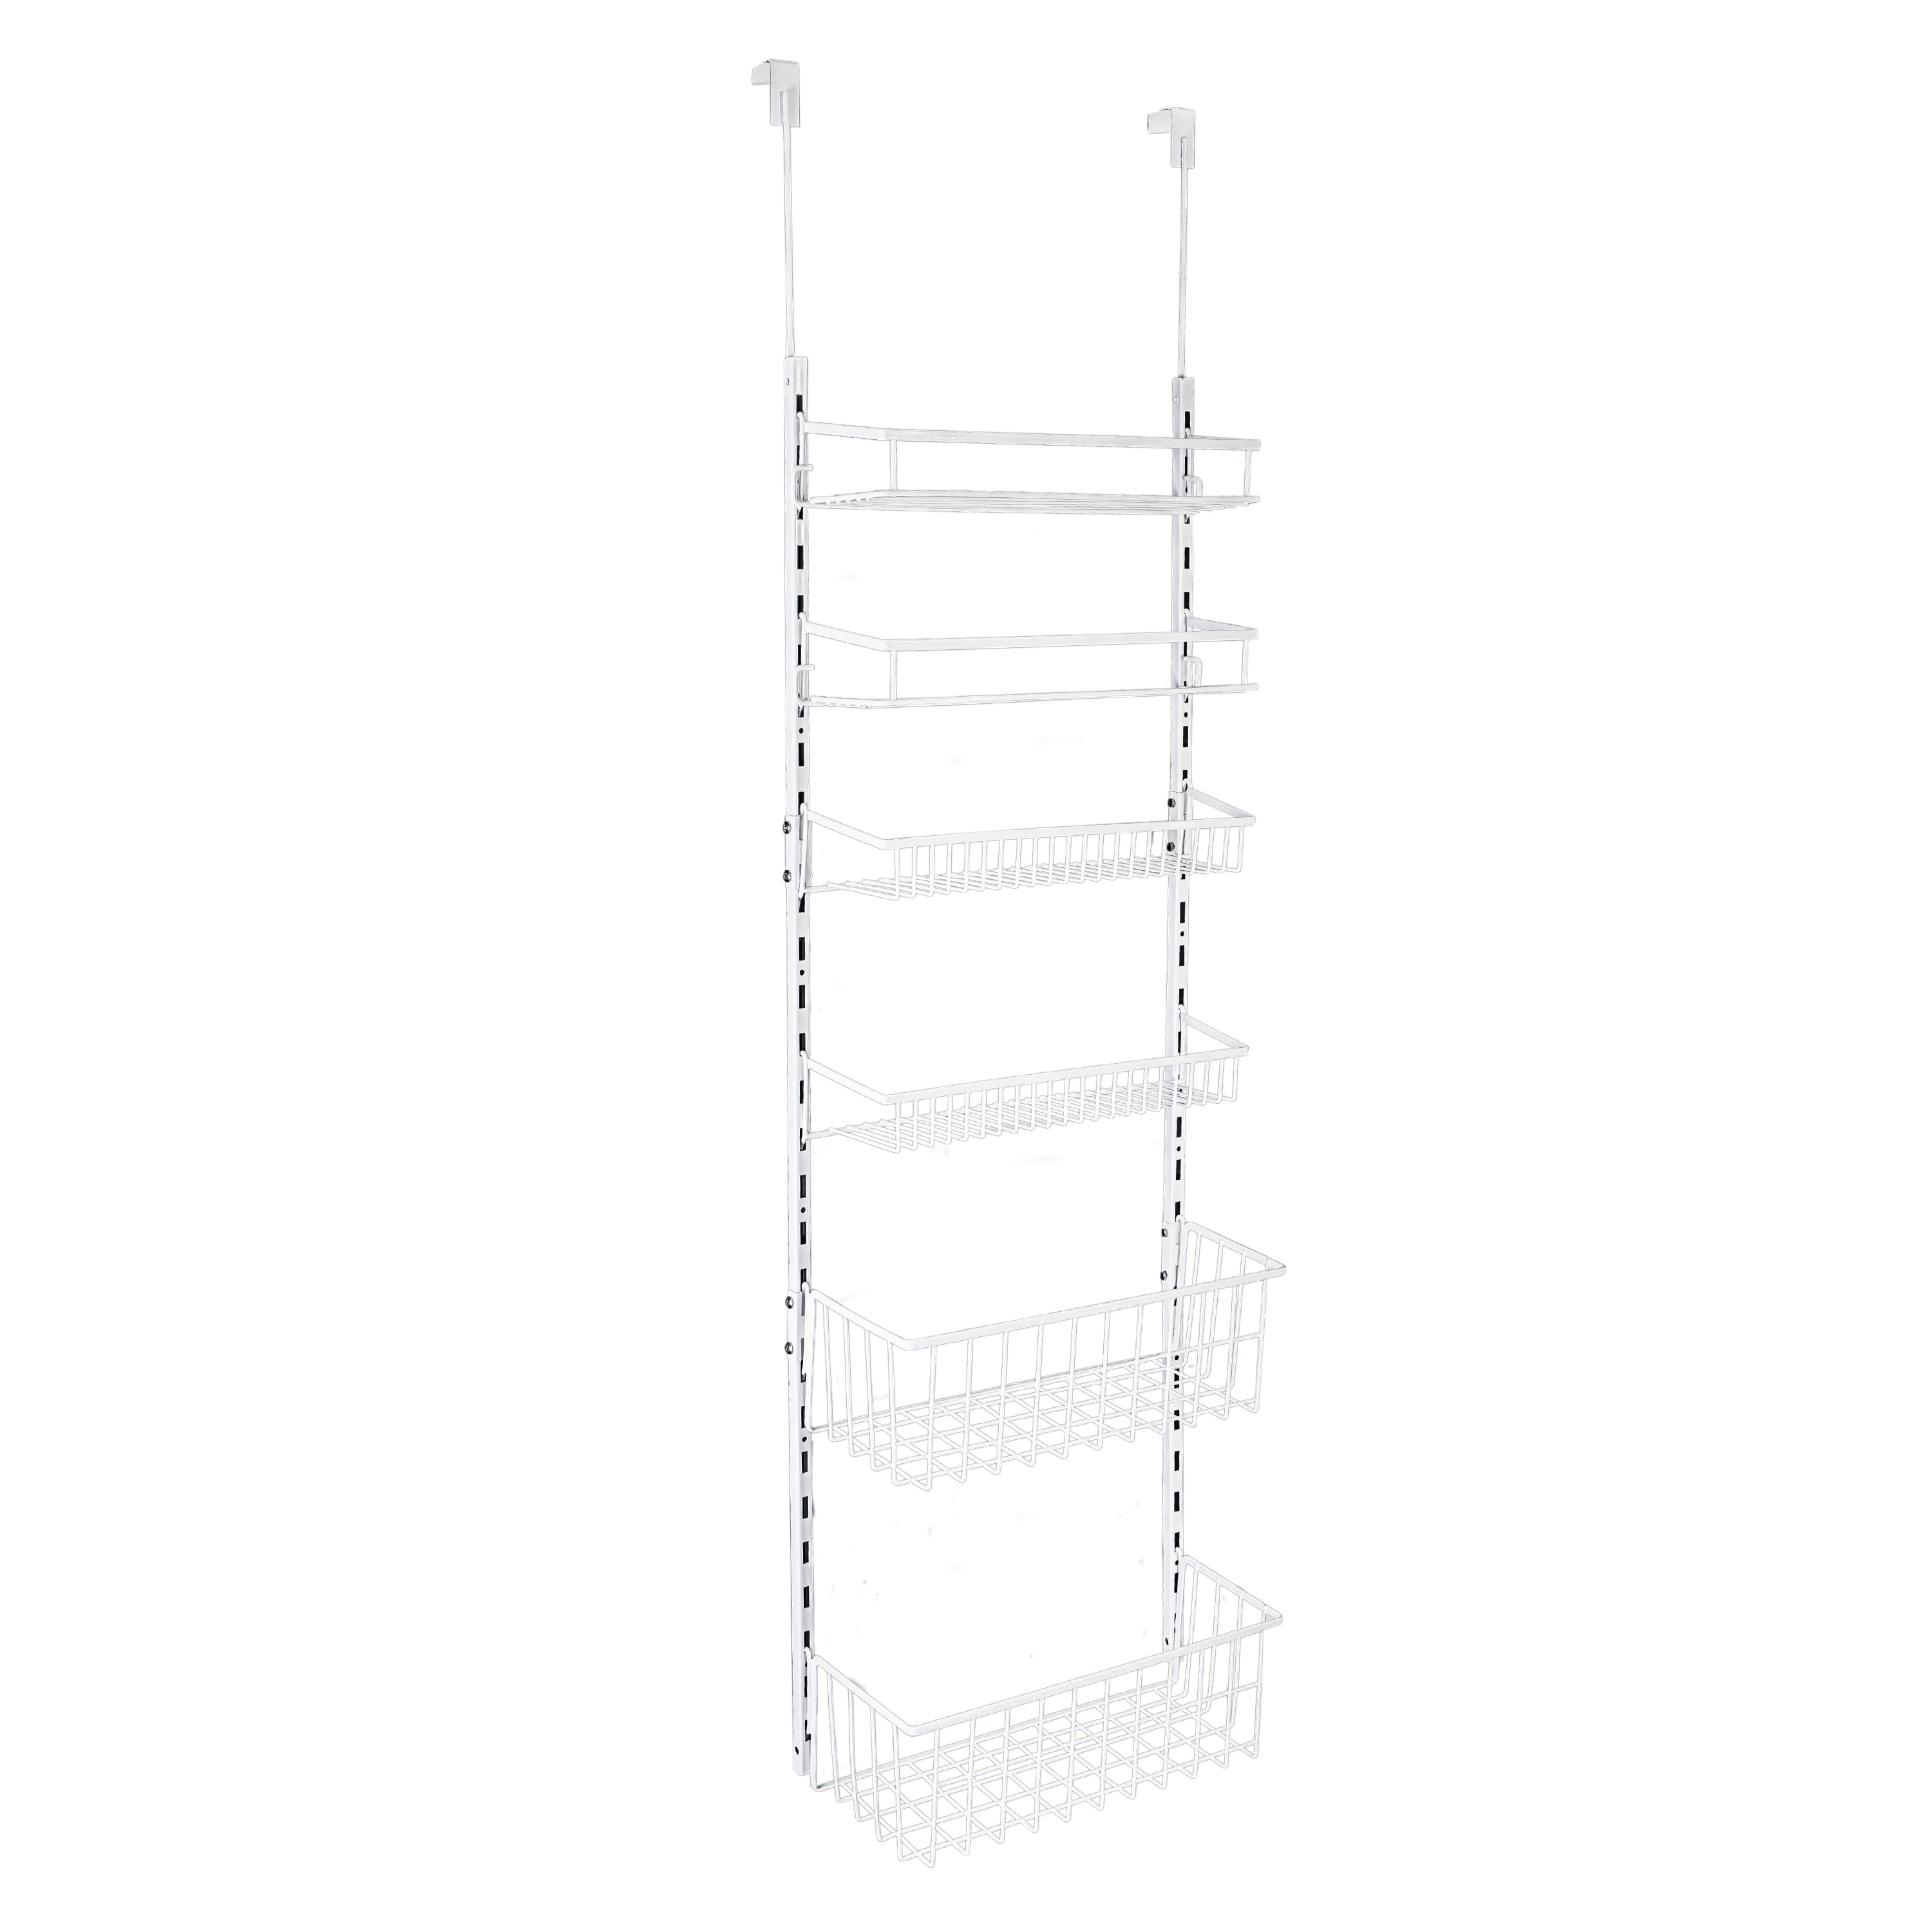 Free -standing Closet Organizer,Heavy Duty Closet Storage with 6 Shelves  and Hanging Bar, All Black